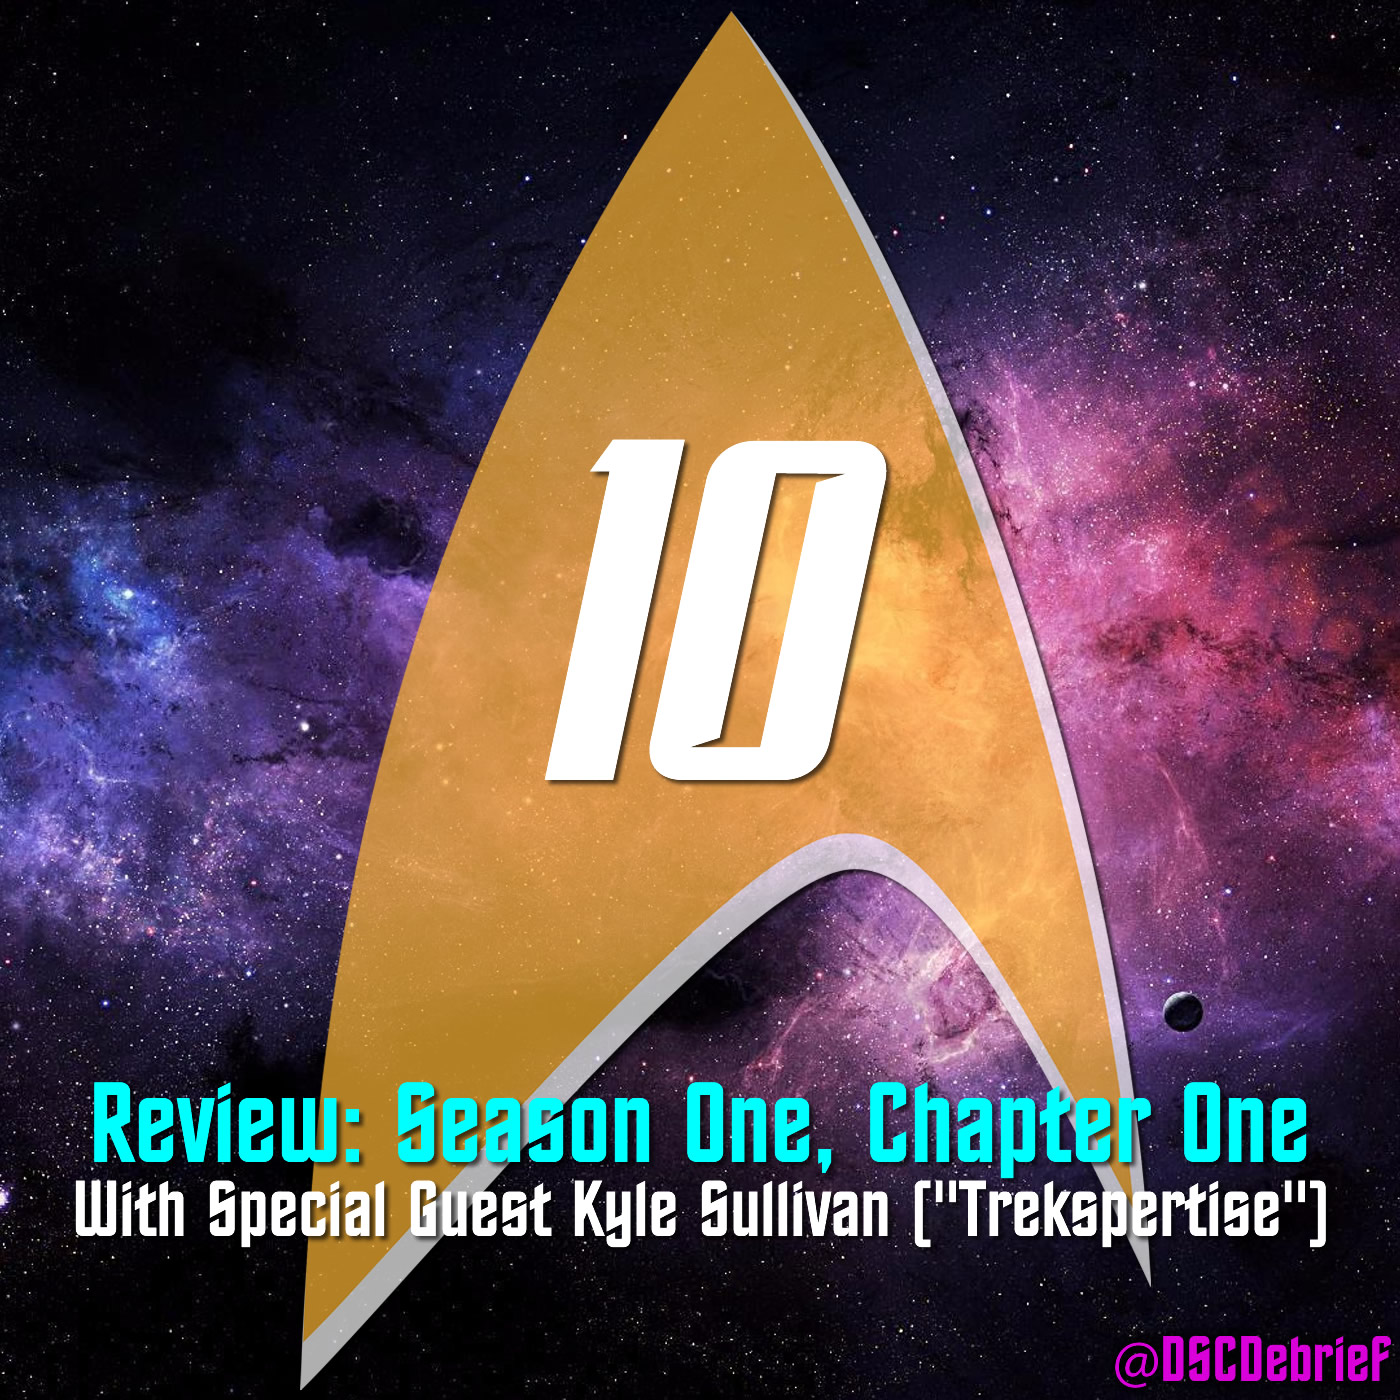 Episode 10 - Review: Season One, Chapter One